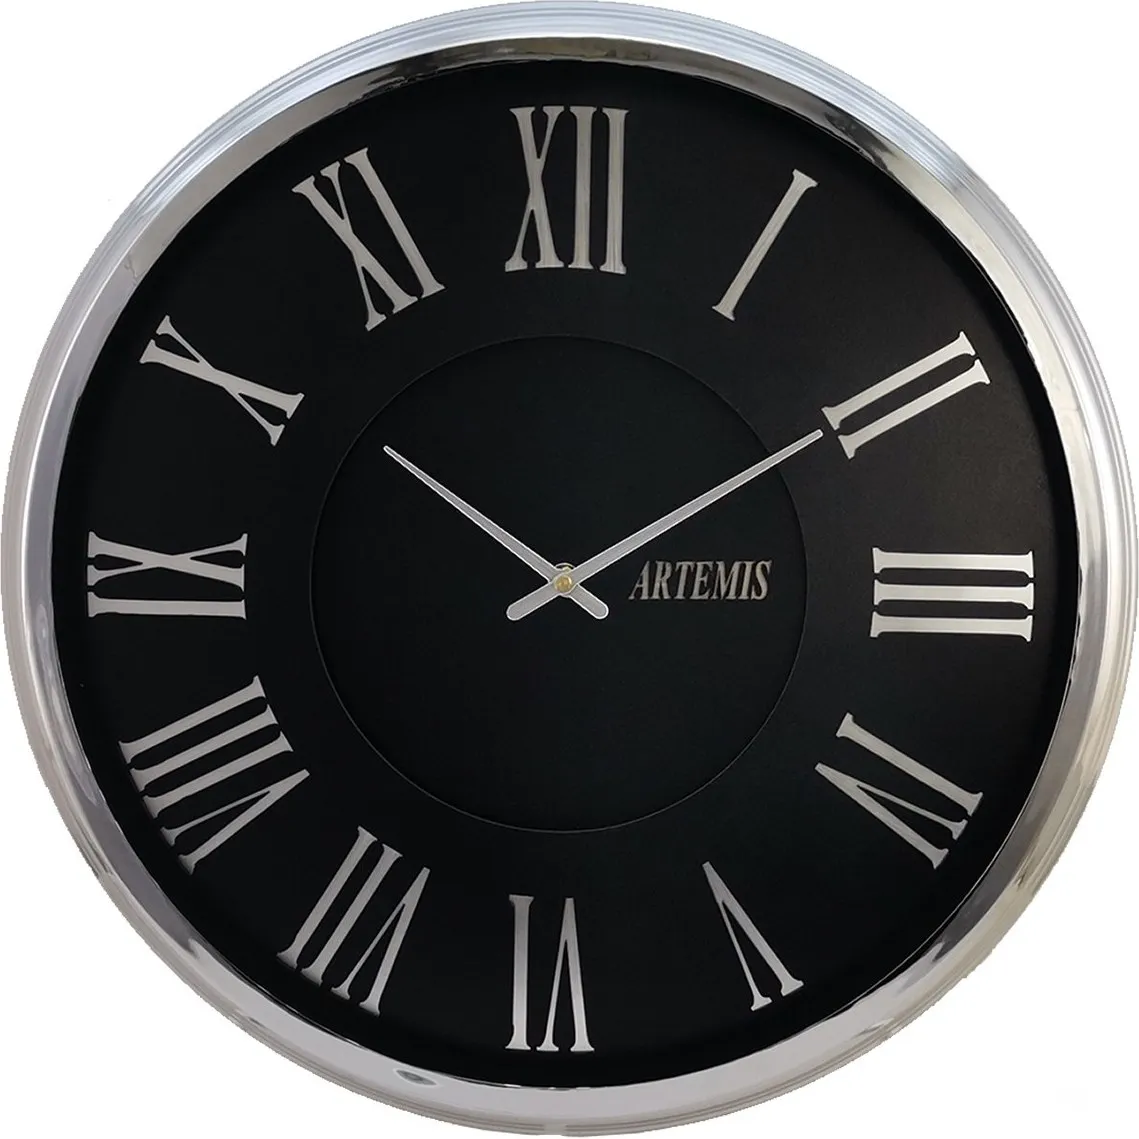 Metal clock faces purchase price + photo